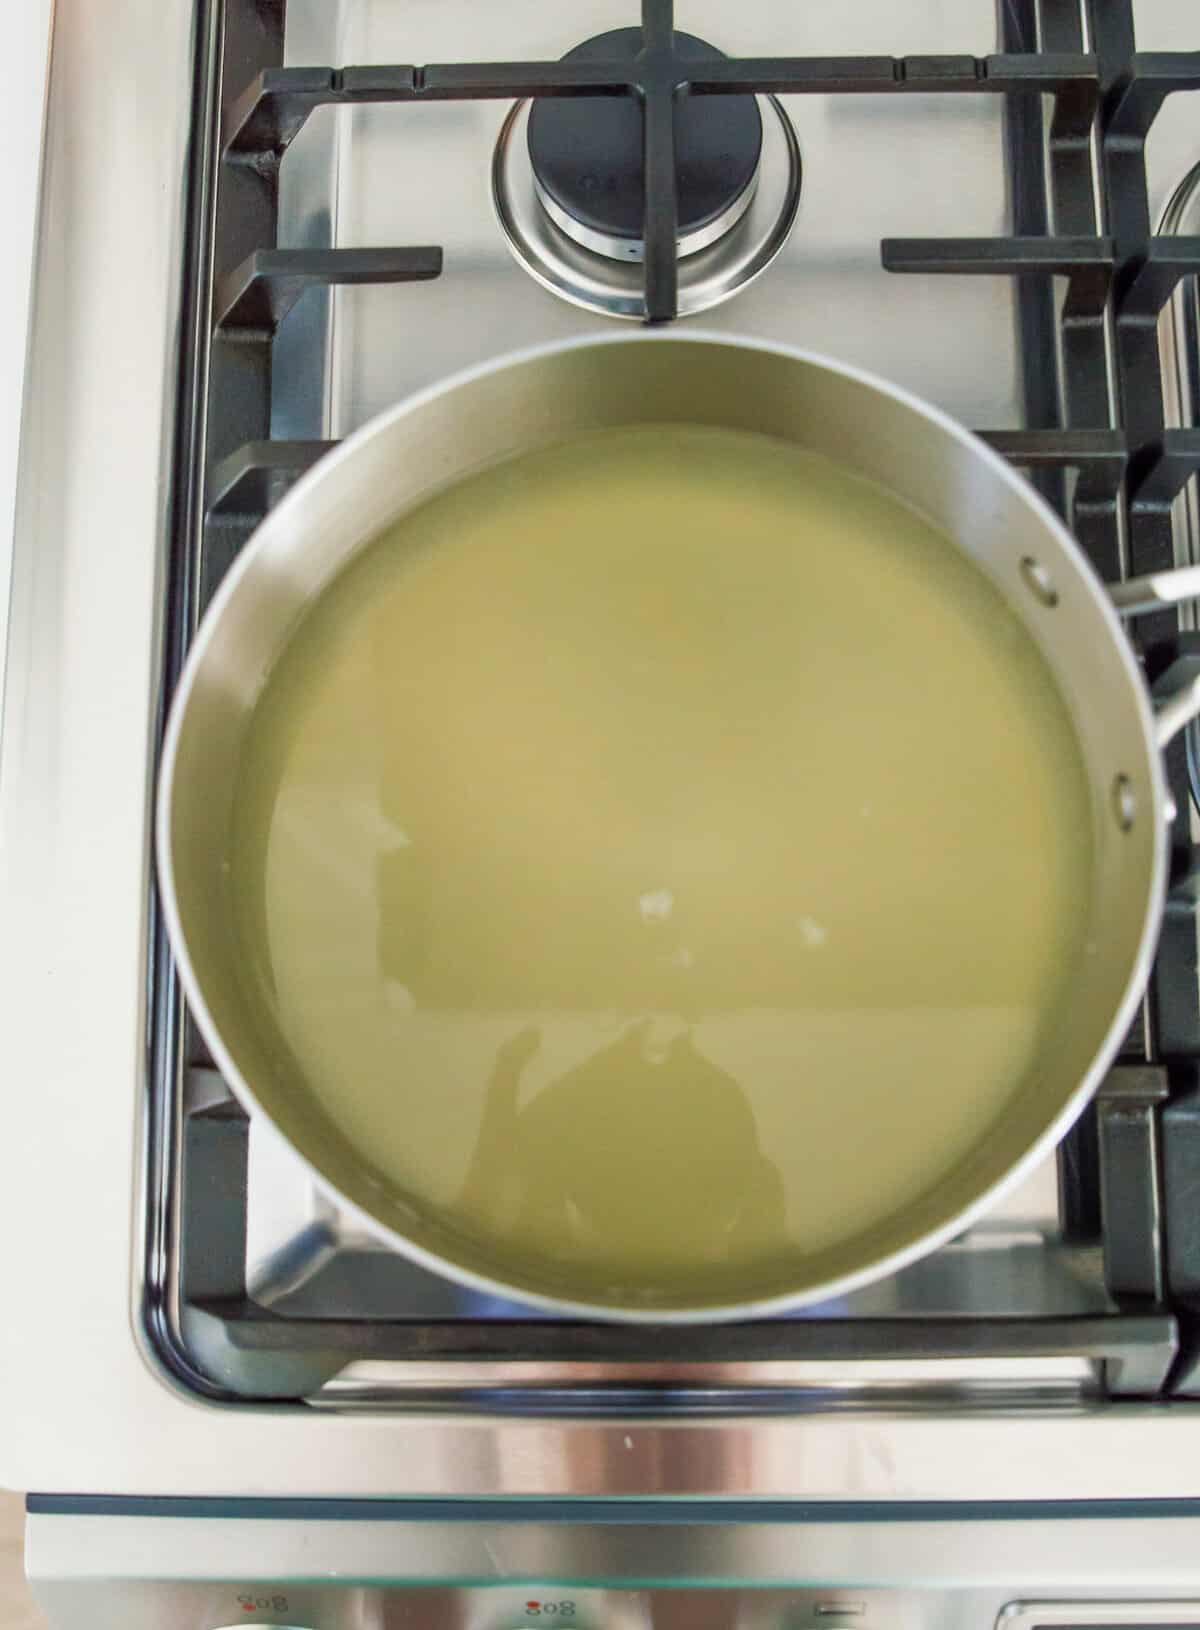 A stainless steel pot on the stovetop with lemon water in it.